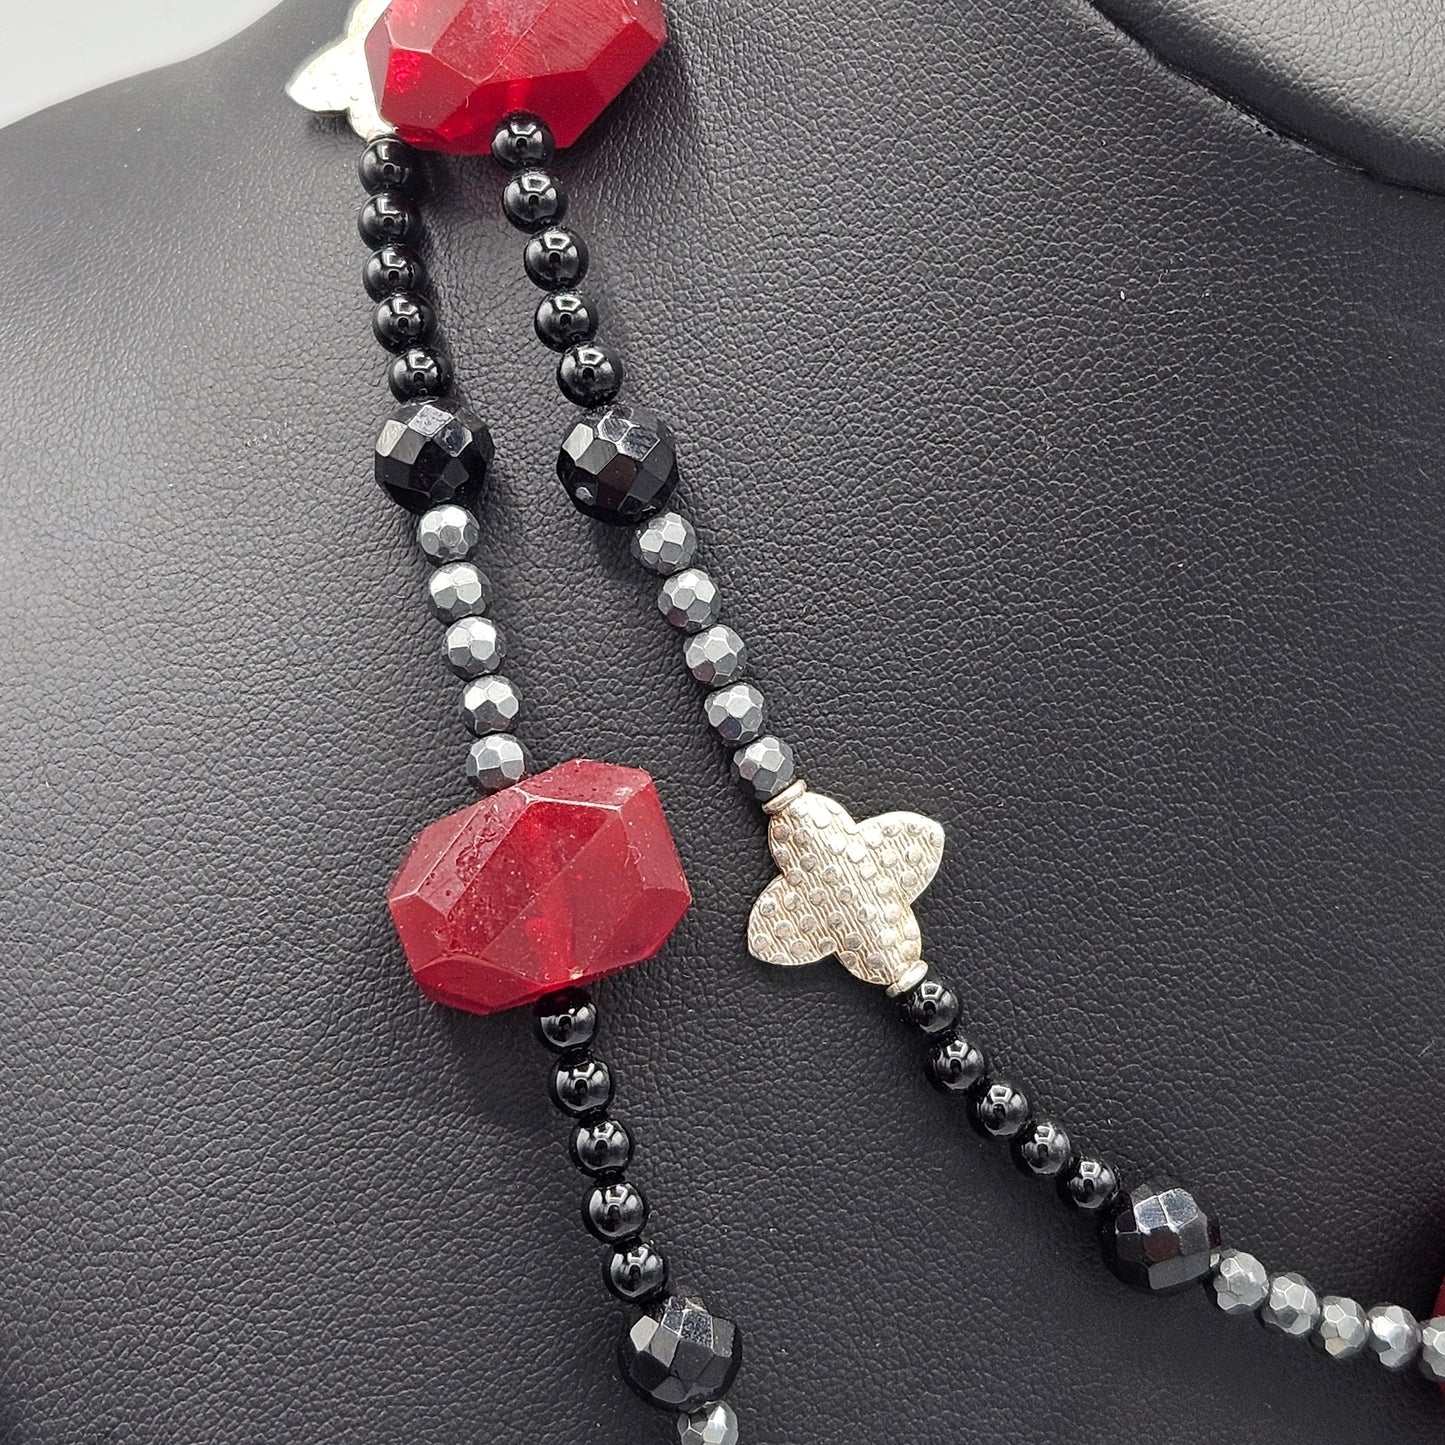 Black, Red & Gray Strand Necklace - 36"